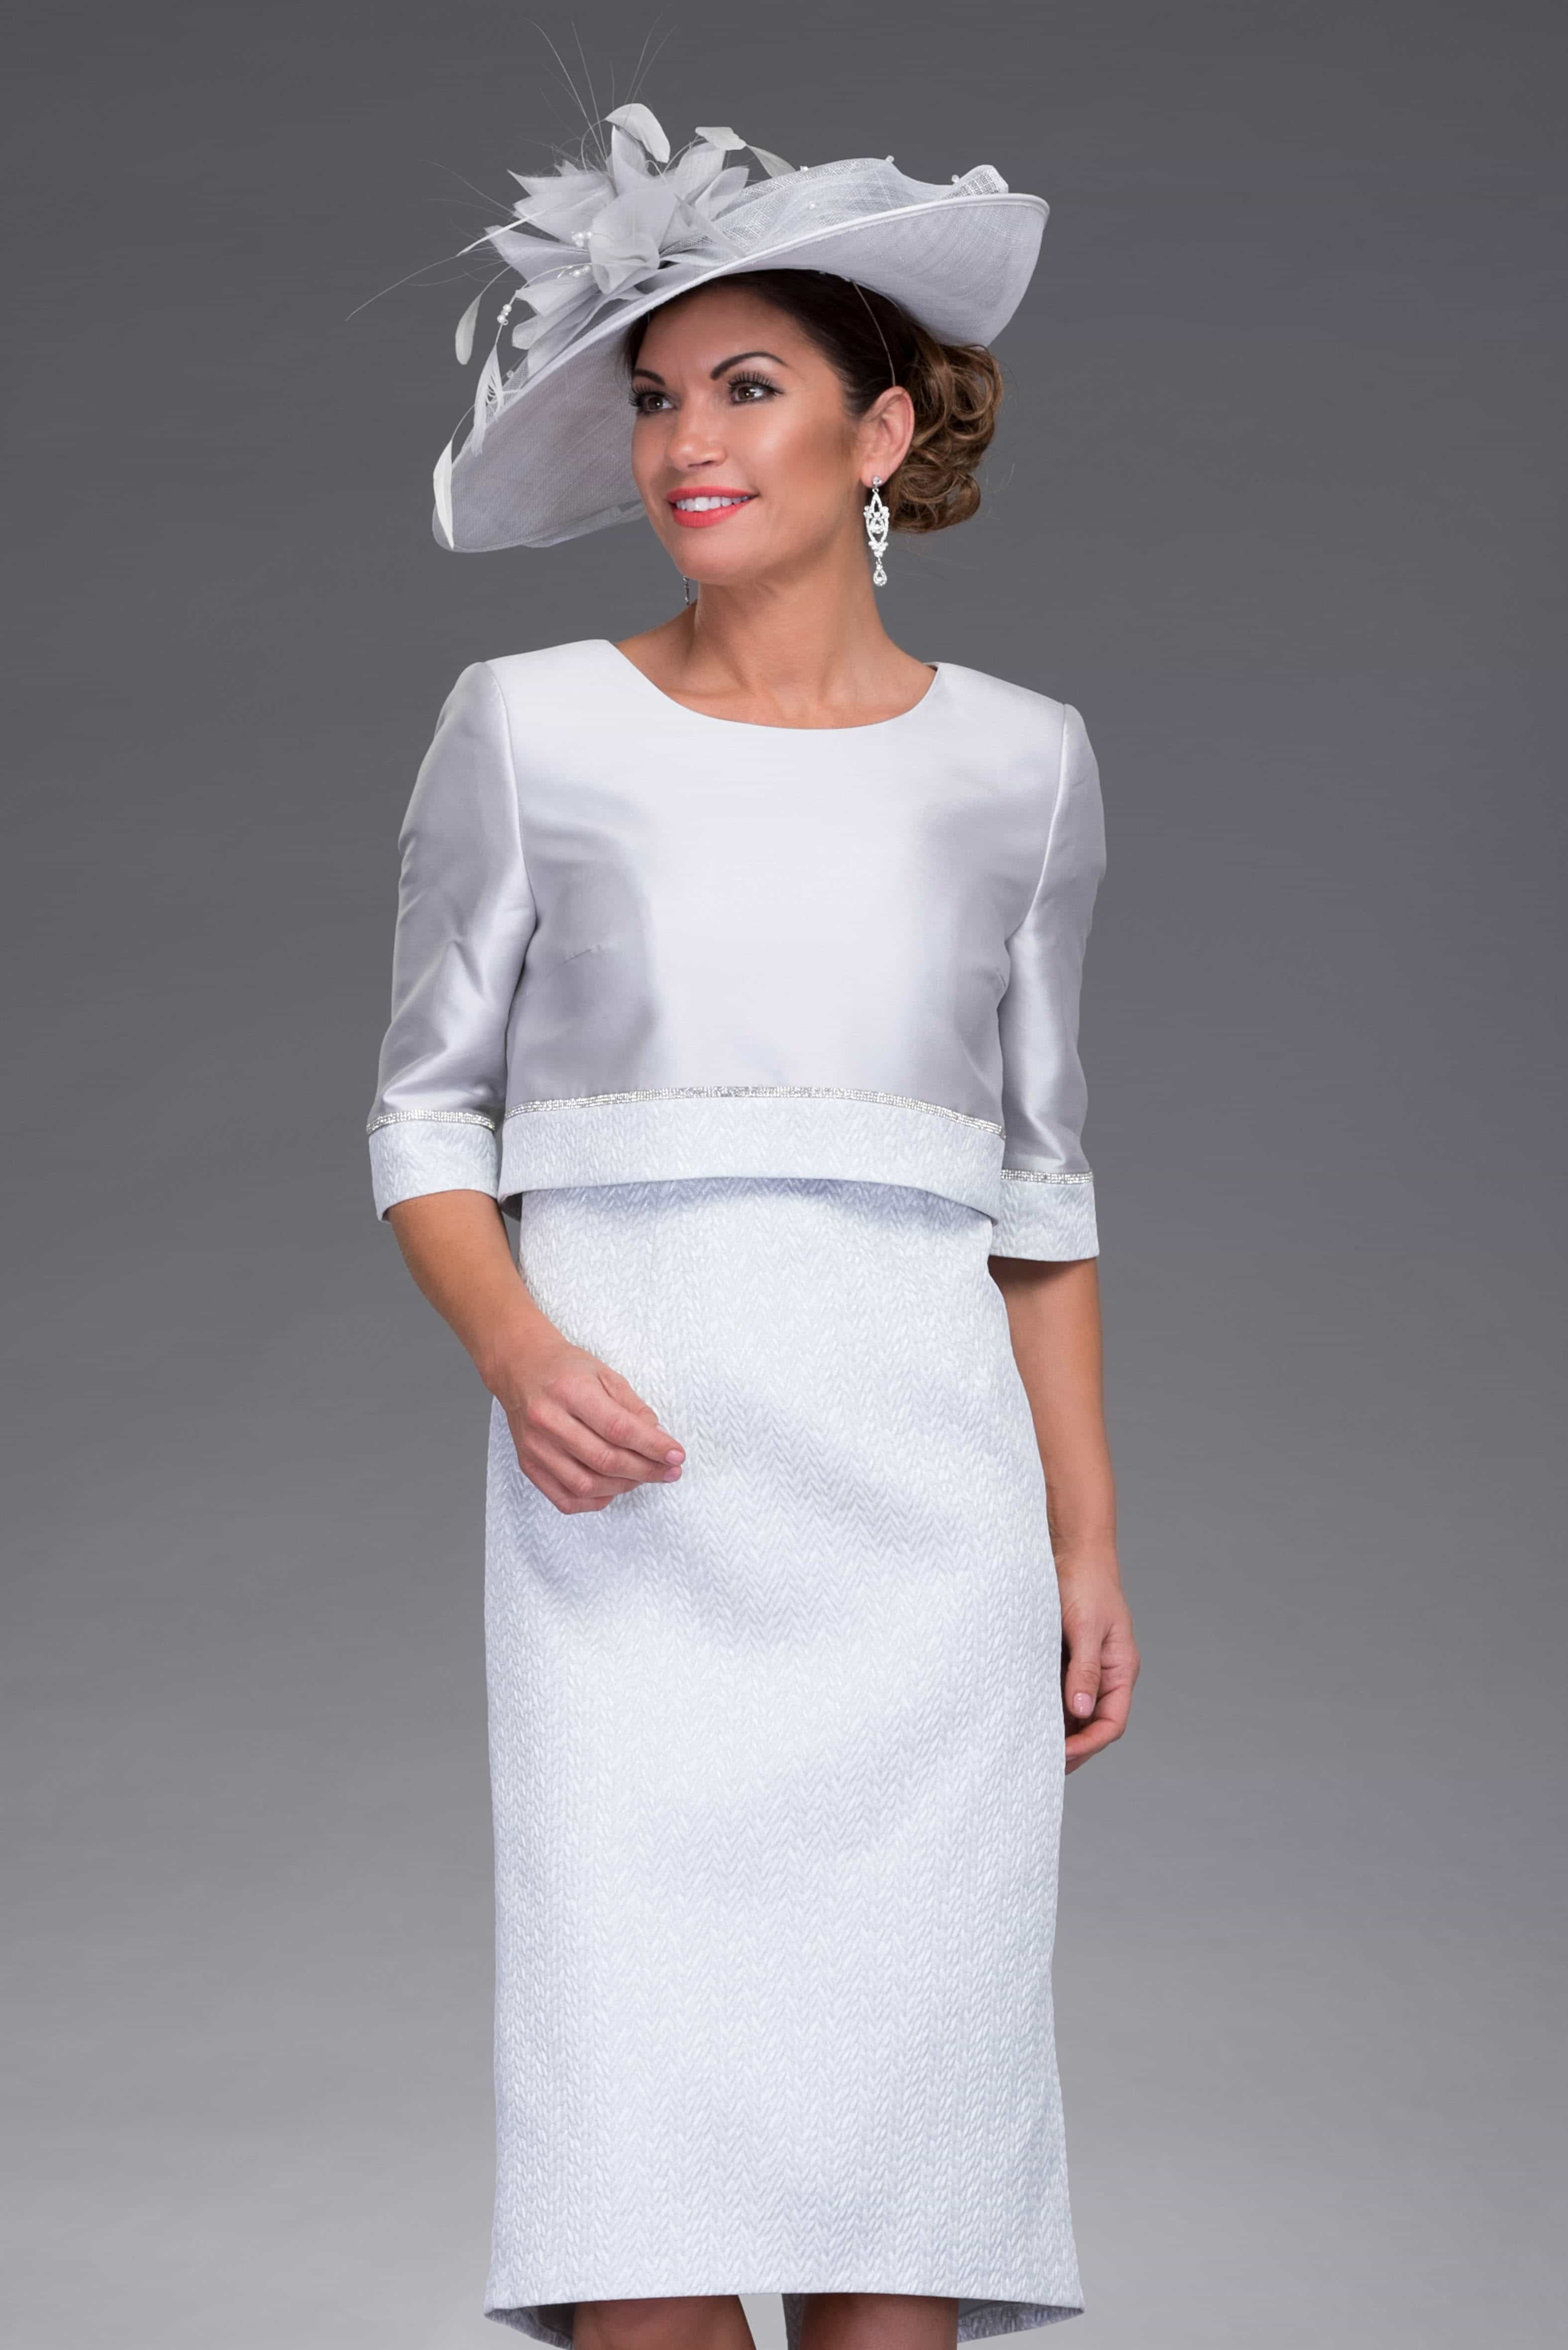 Short fitted dress with matching jacket. 6928 - Catherines of Partick